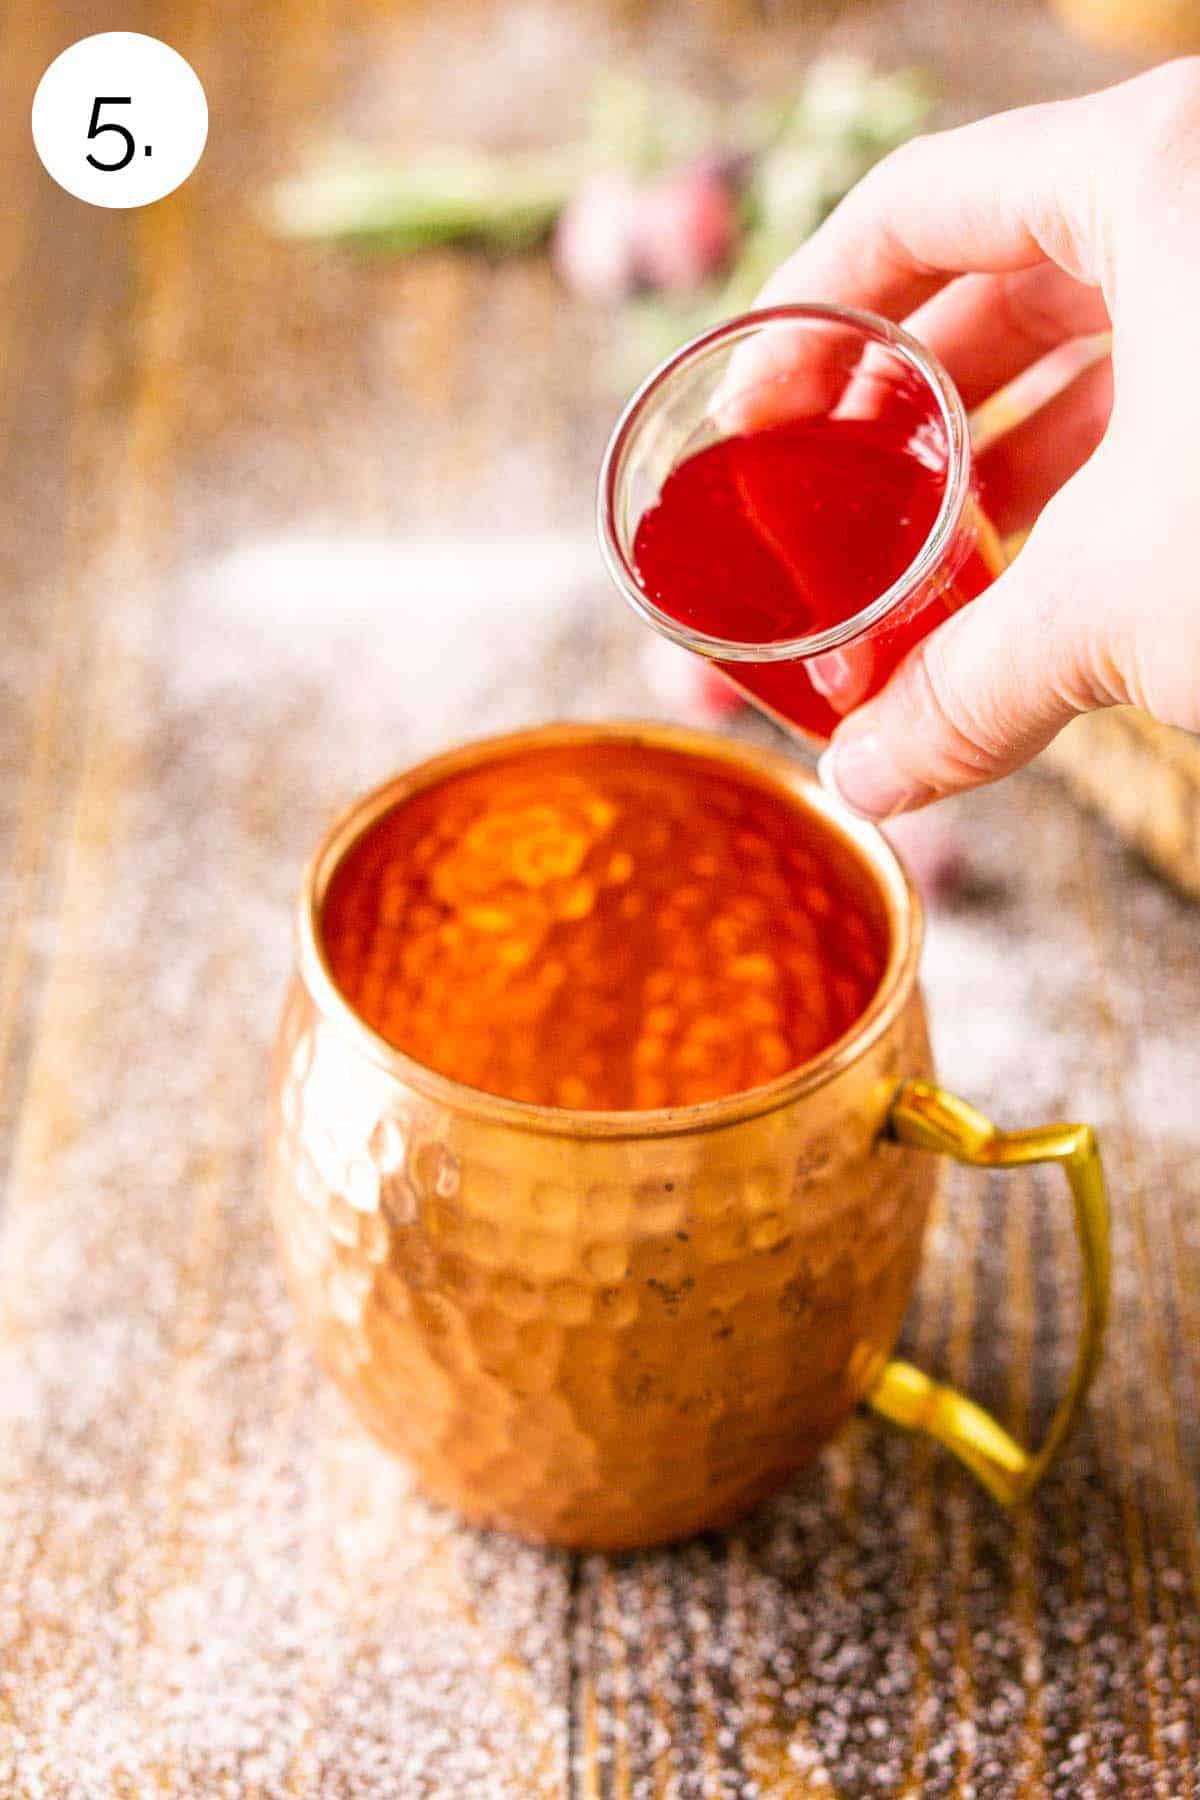 A hand pouring a shot glass of the cranberry syrup into a copper mug on a brown wooden surface.